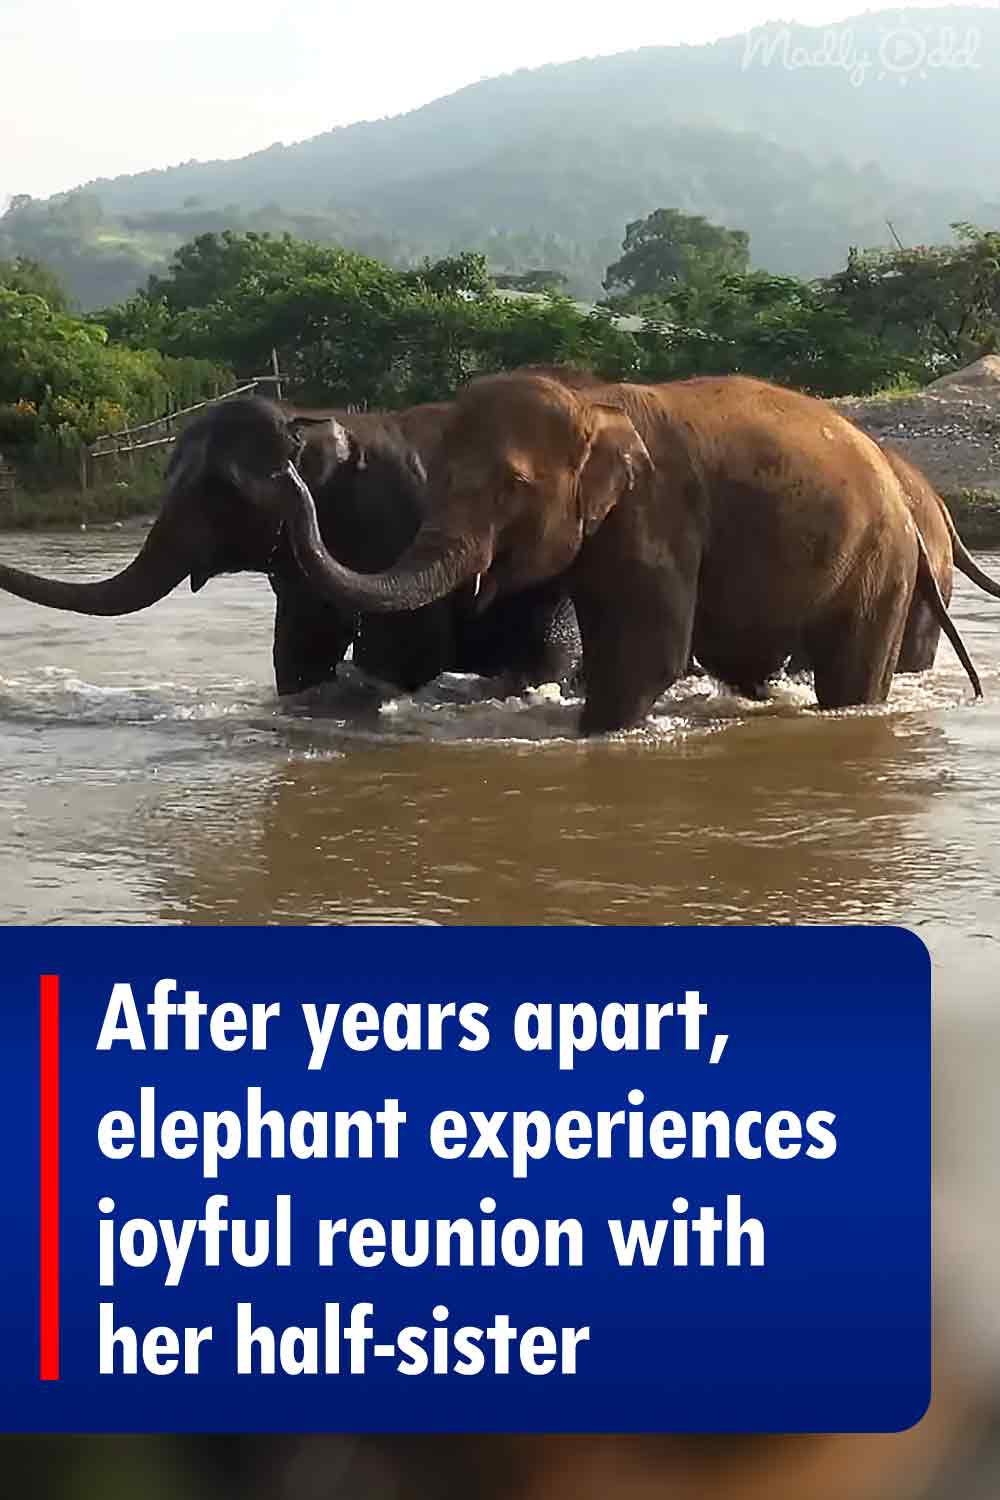 After years apart, elephant experiences joyful reunion with her half-sister